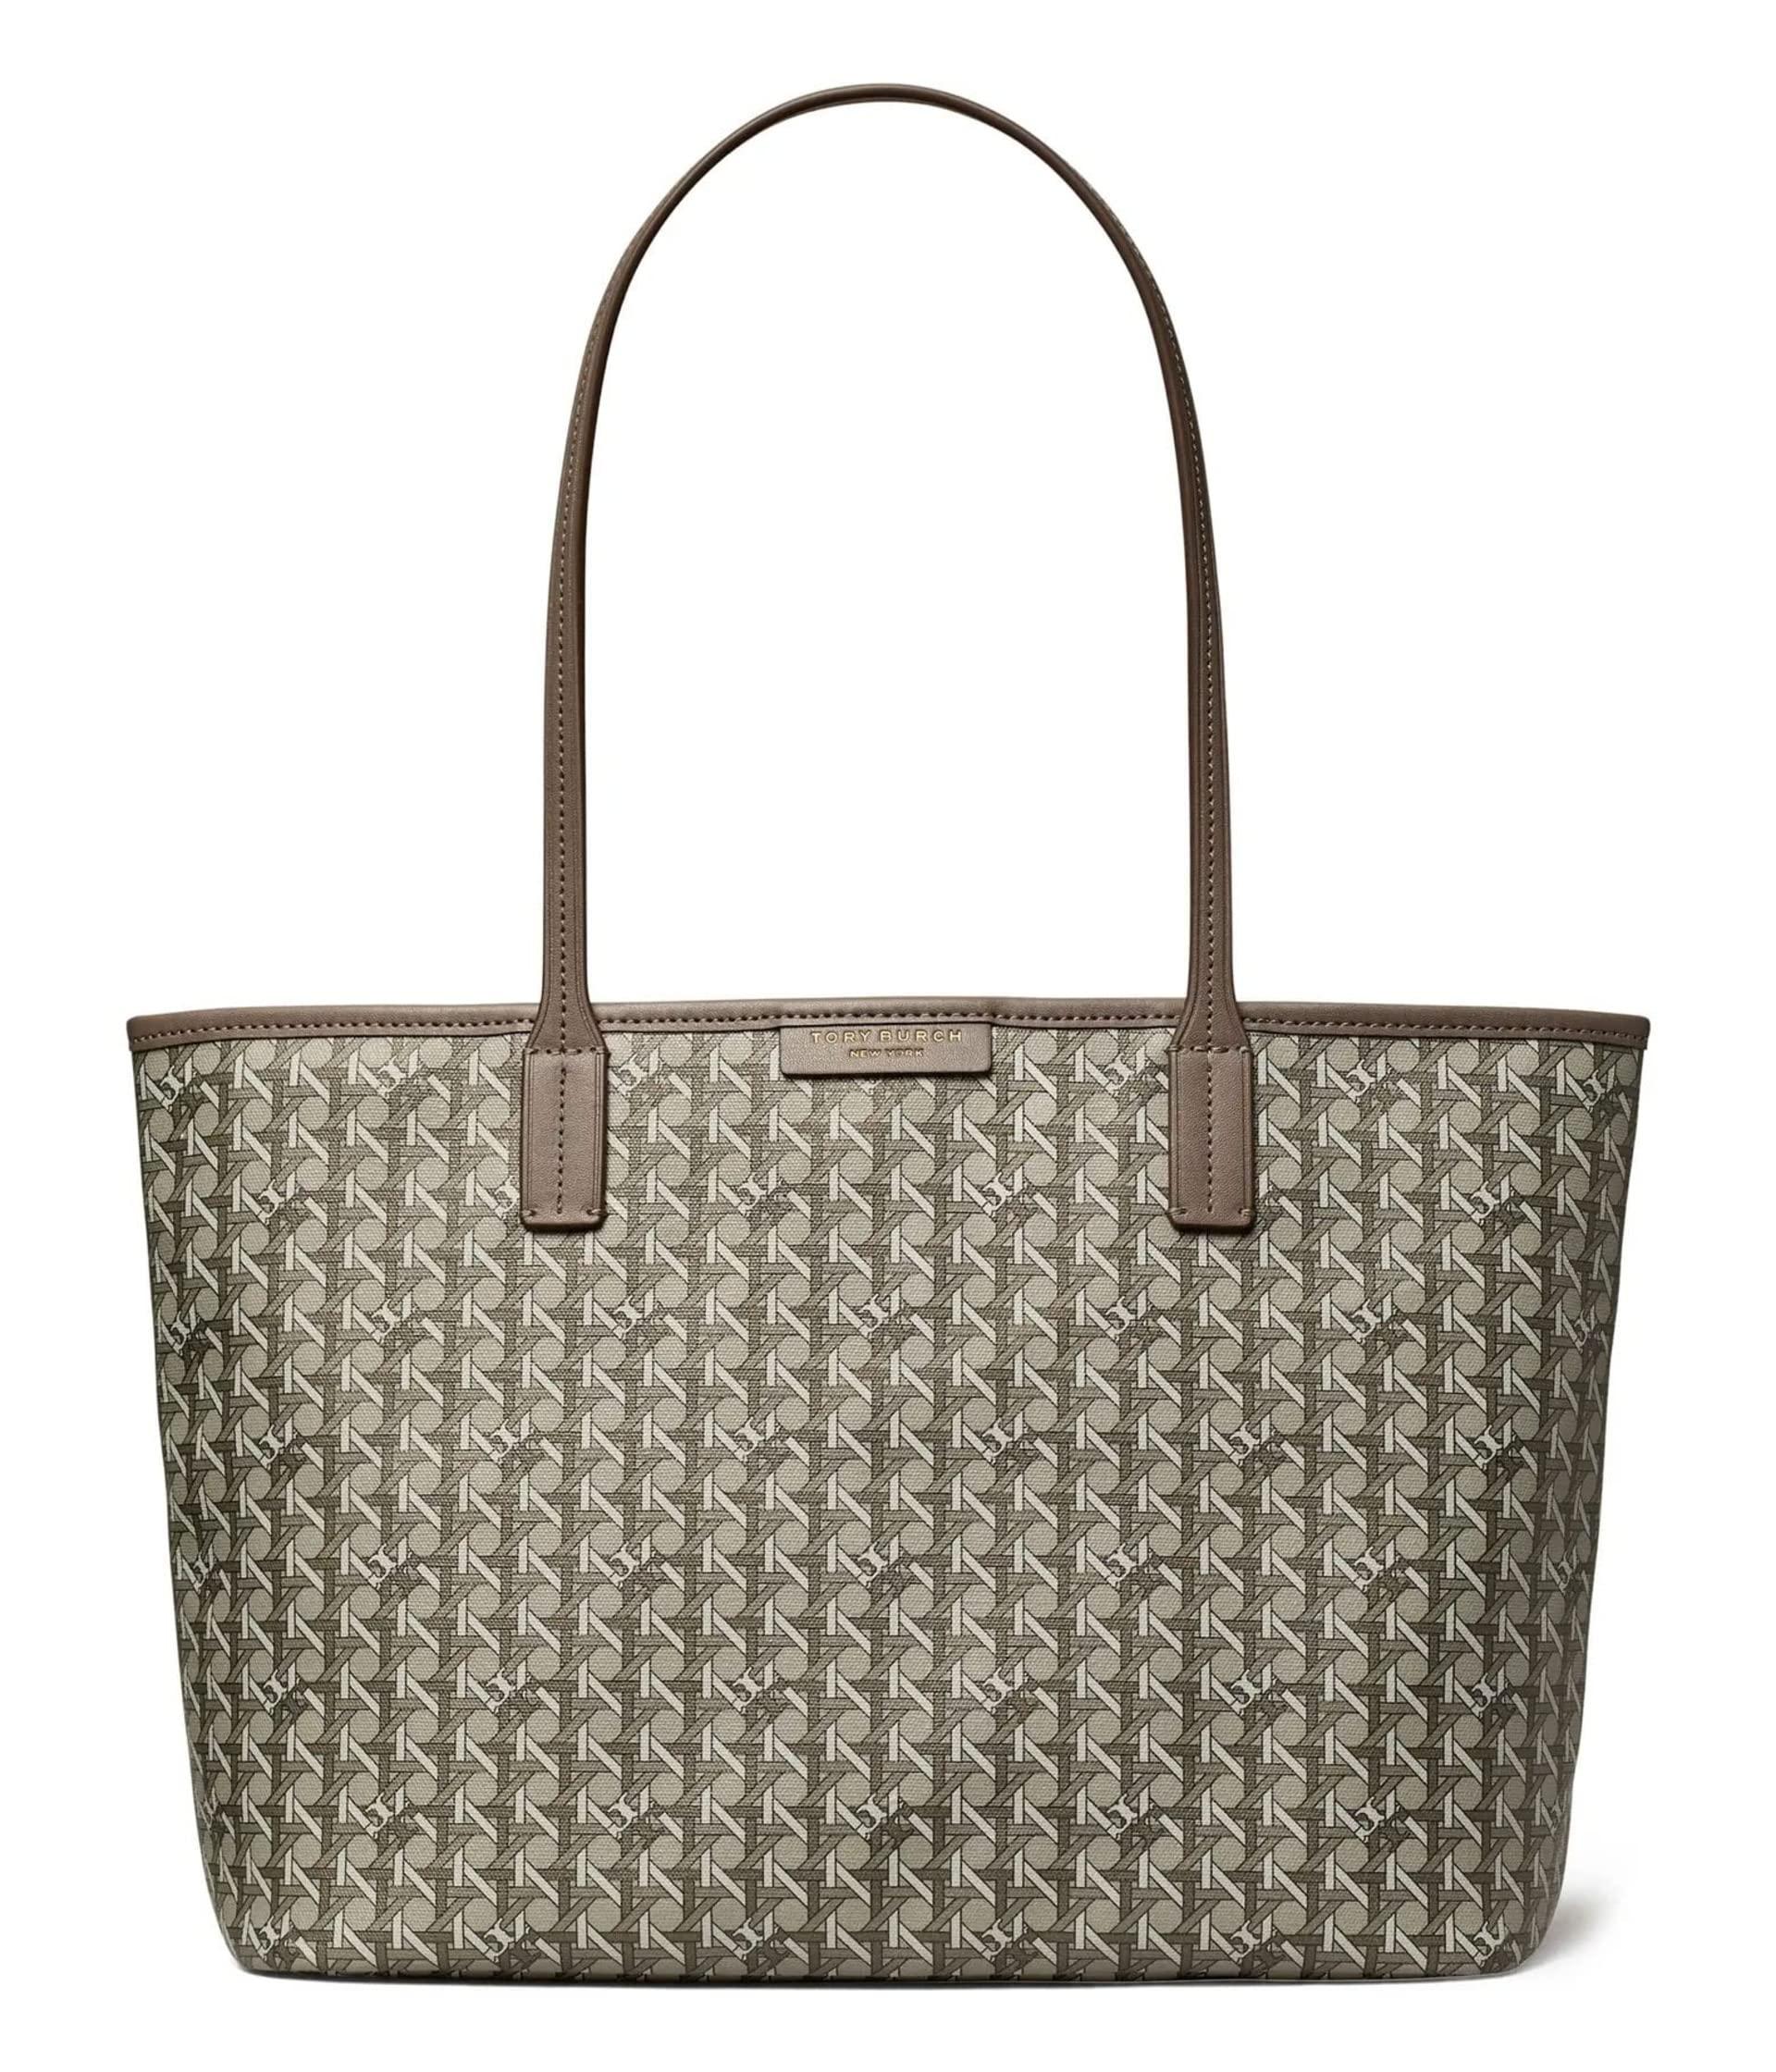 Tory Burch Ever-ready Small Tote in Metallic | Lyst